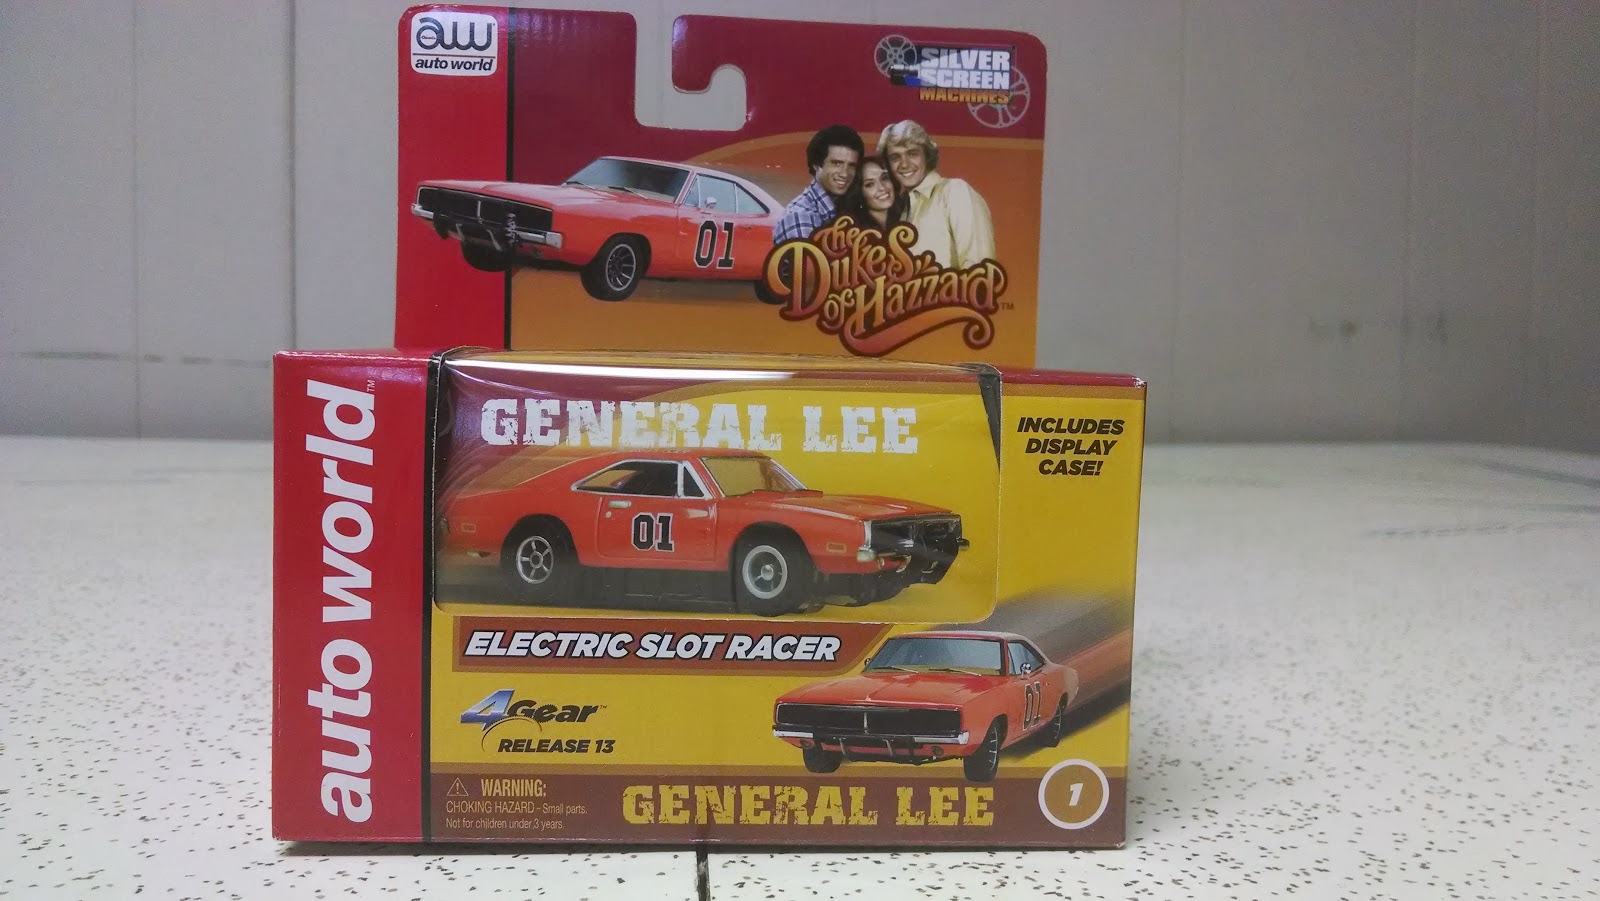 Dukes of Hazzard Collector: Auto World's New Xtraction Release 13